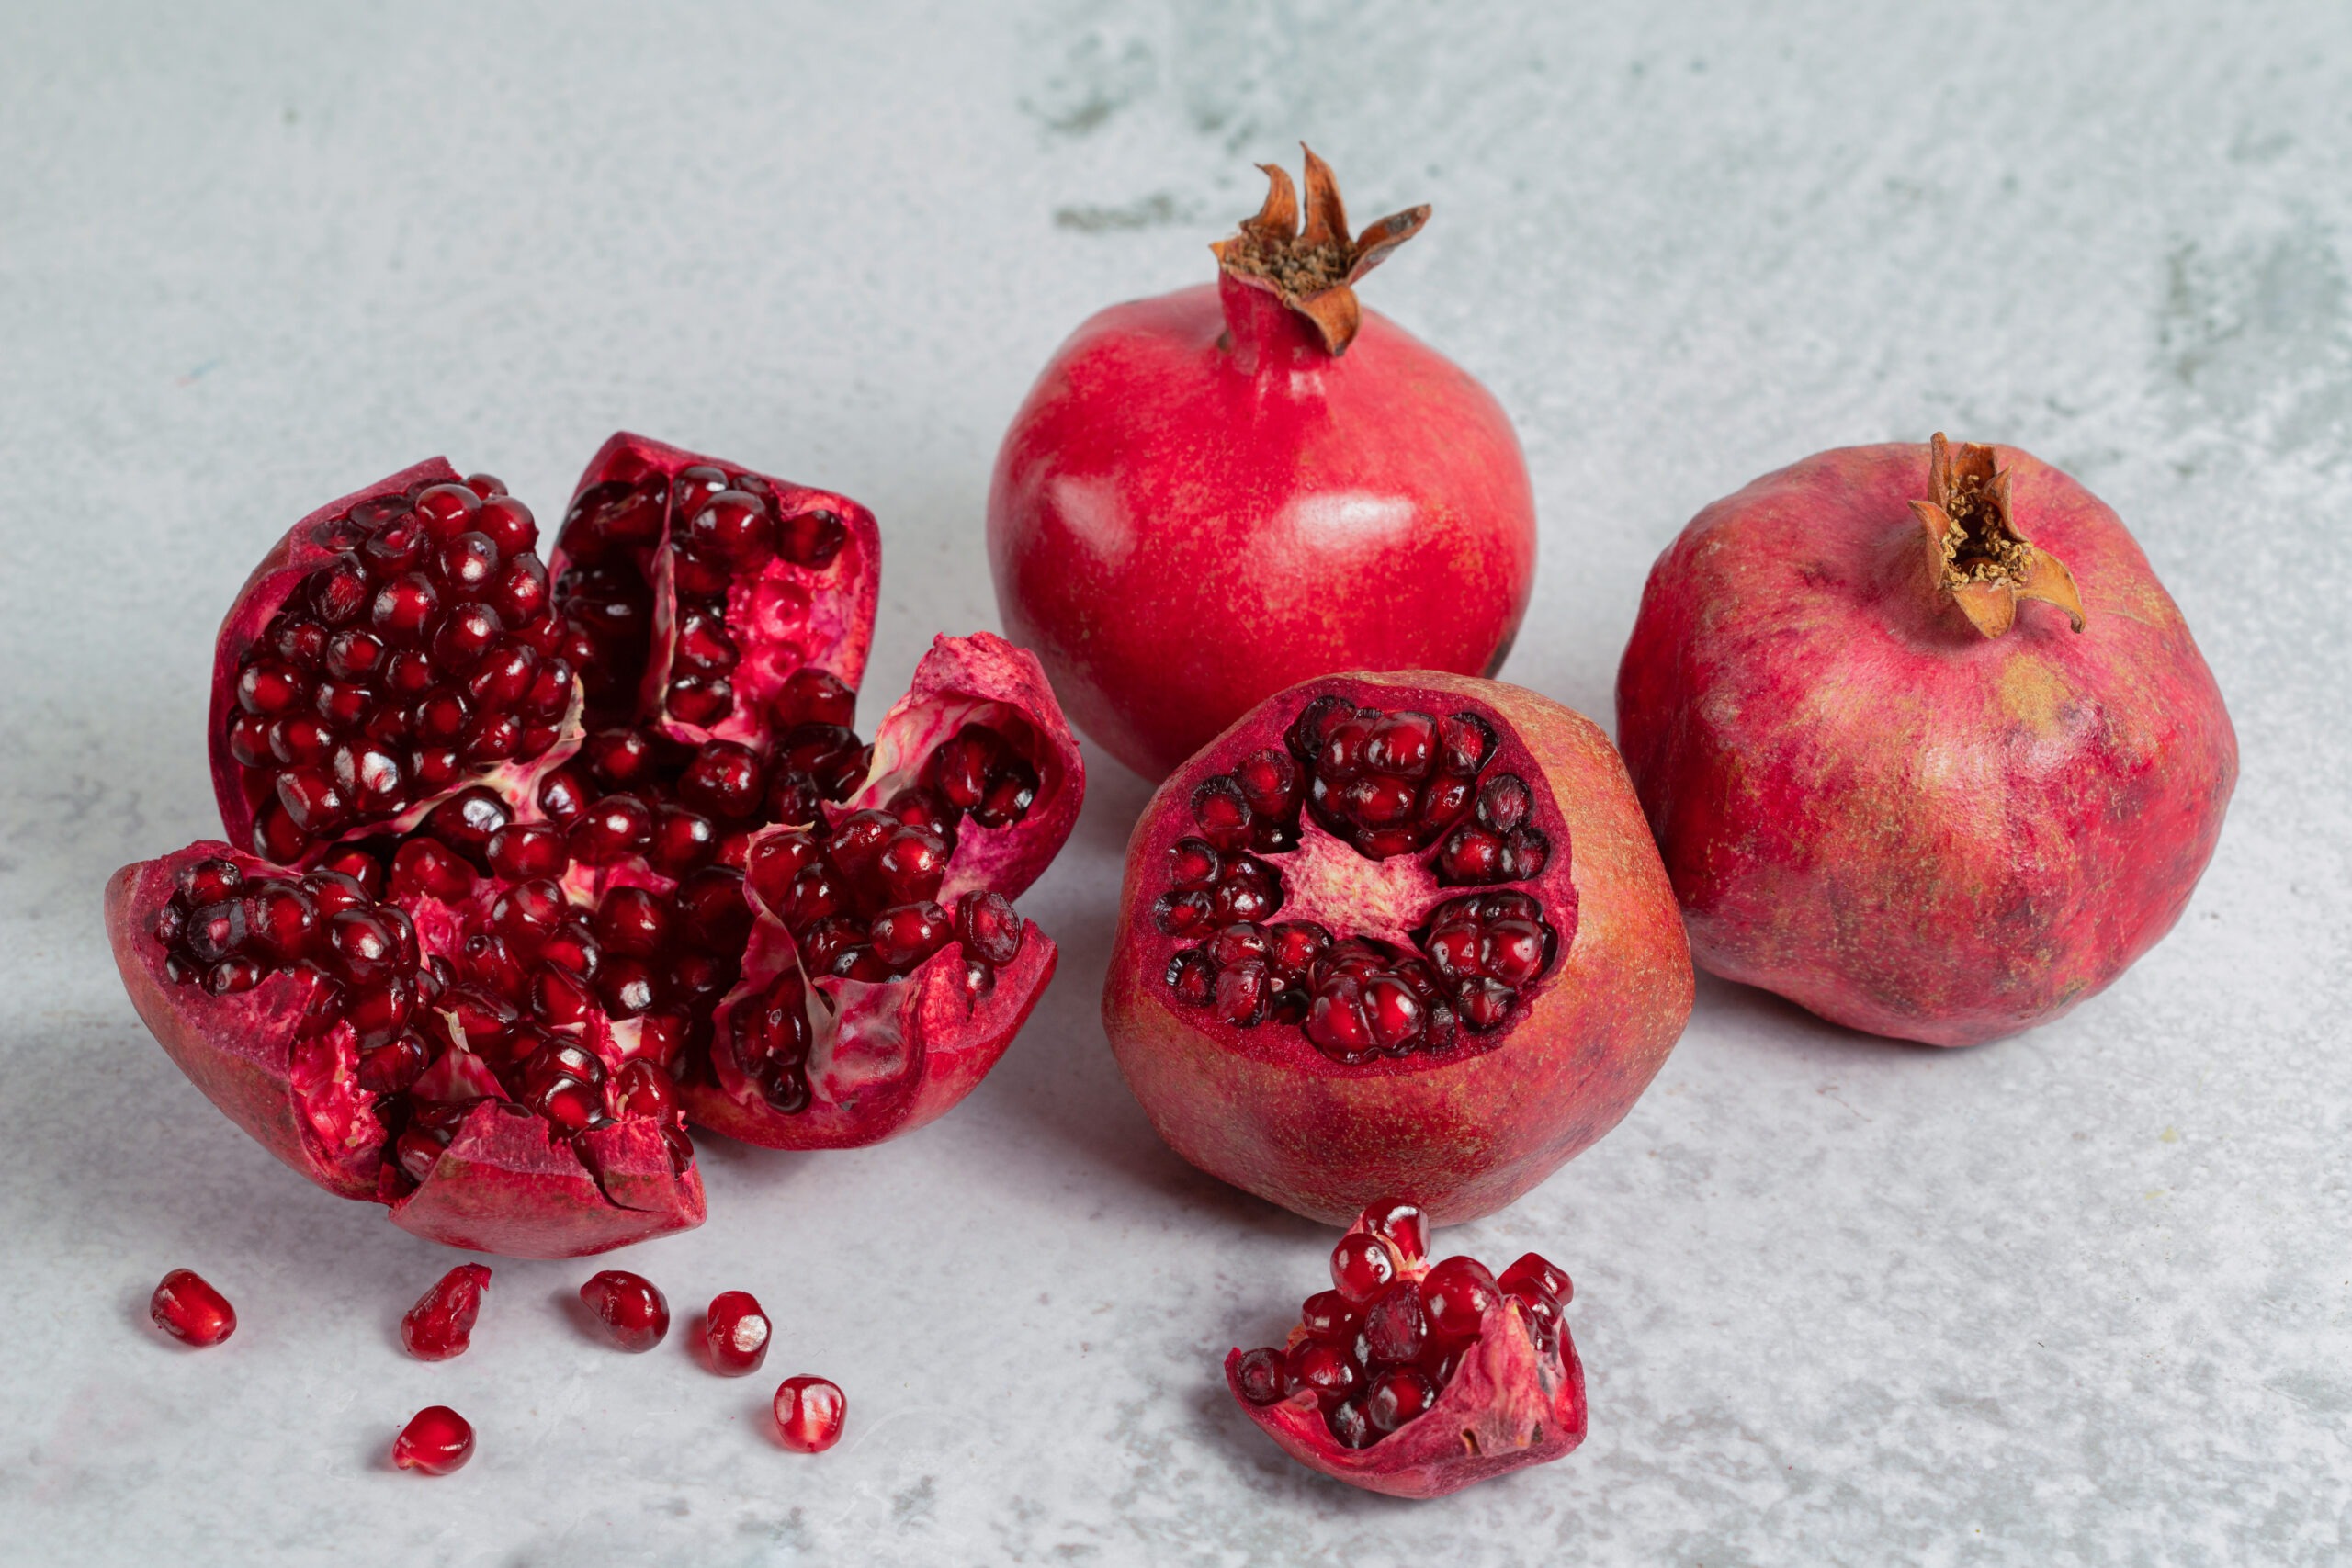 Nutrients in Pomegranate Seeds